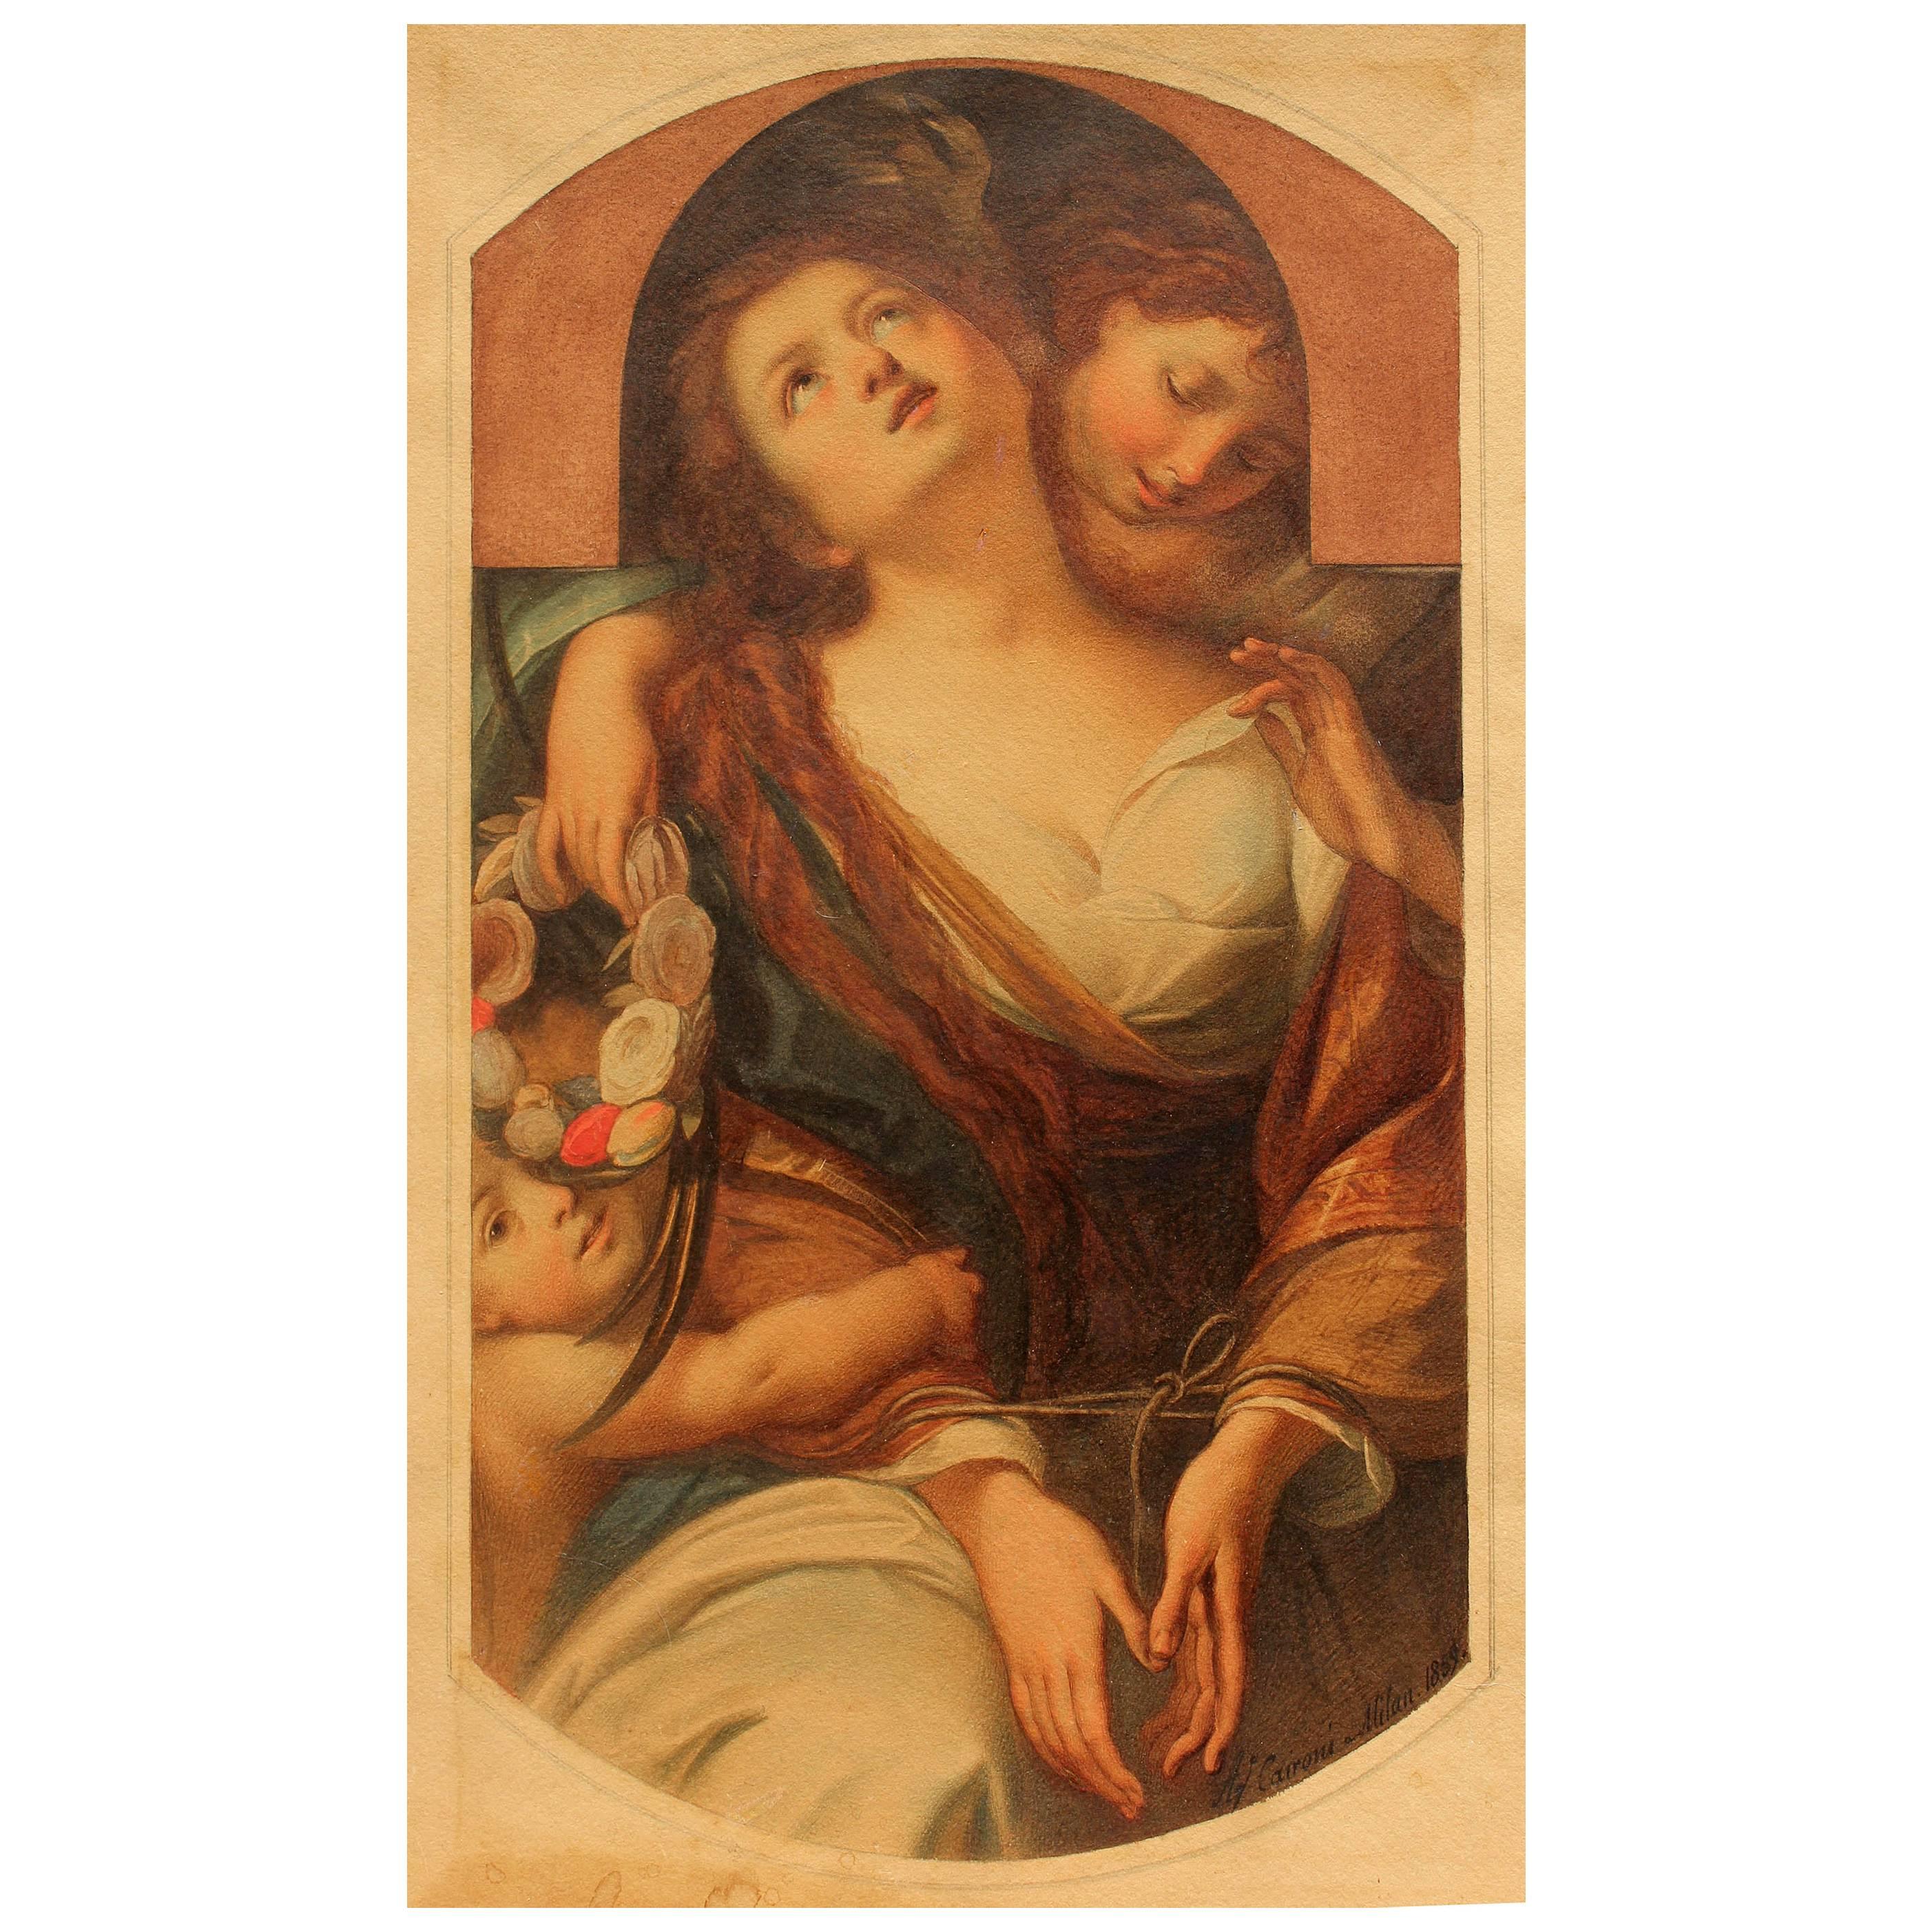 Exceptionally fine 19th century allegorical painting of chastity. Watercolor painted by Italian artist Agostino Caironi. Dated 1859 Milan.